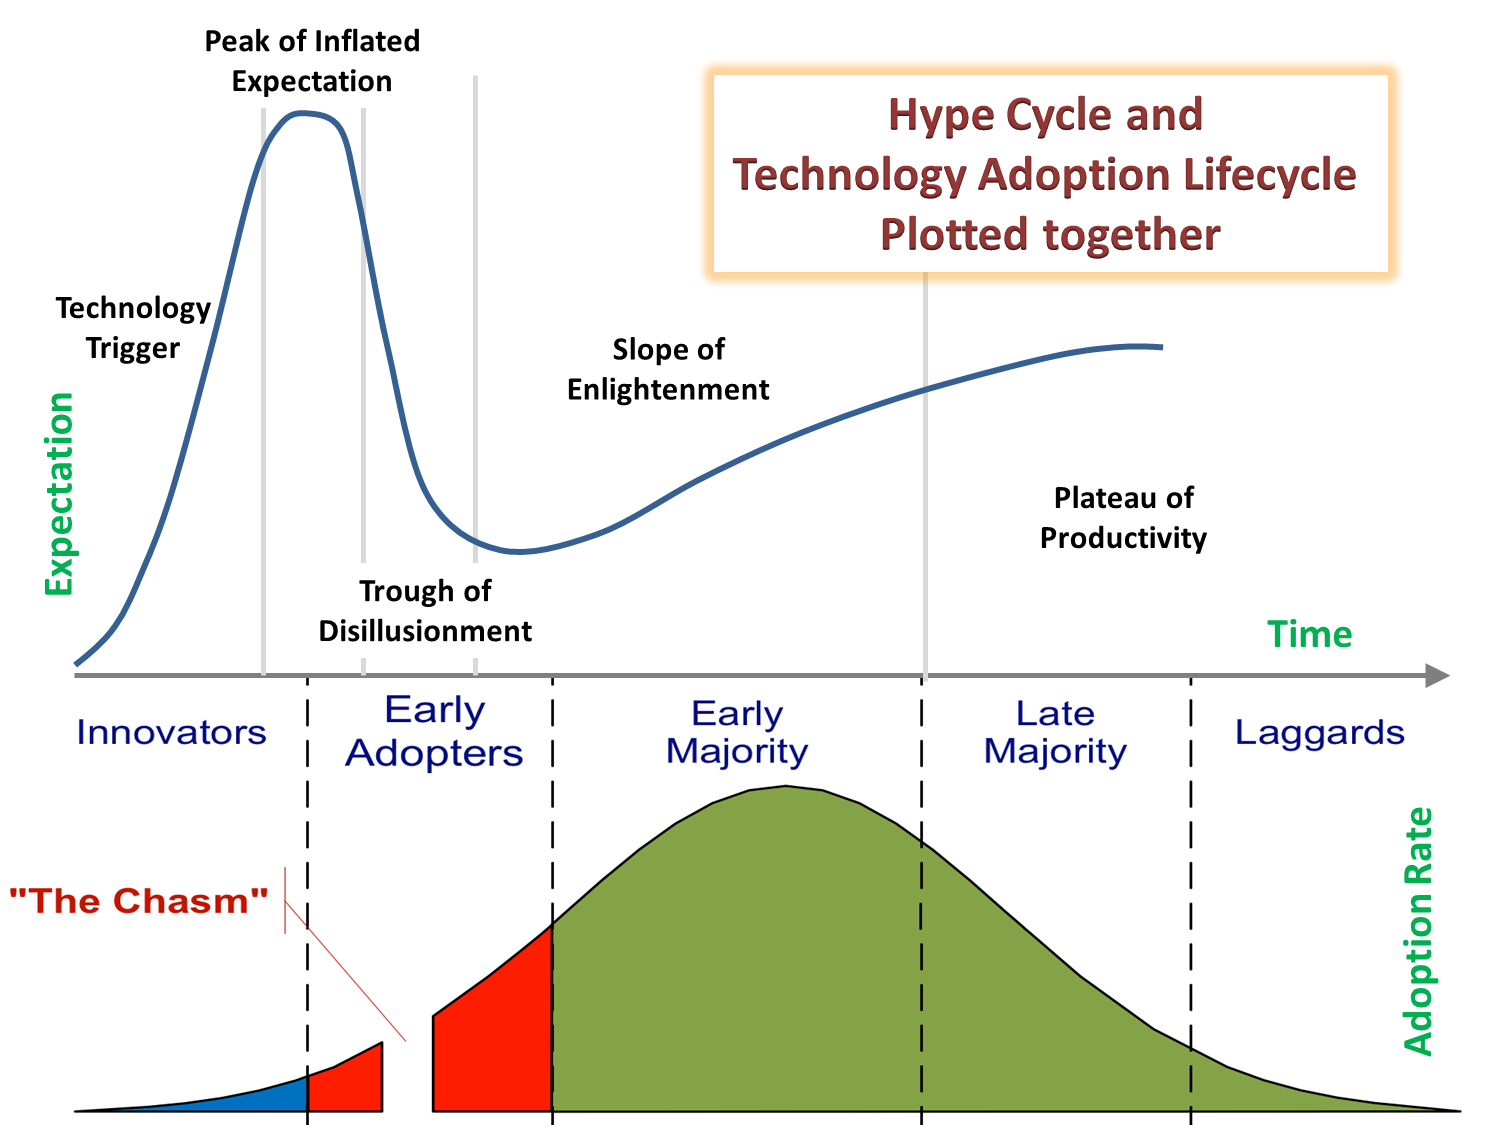 Hype Cycle and Technology Adoption Lifecycle Plotted Together